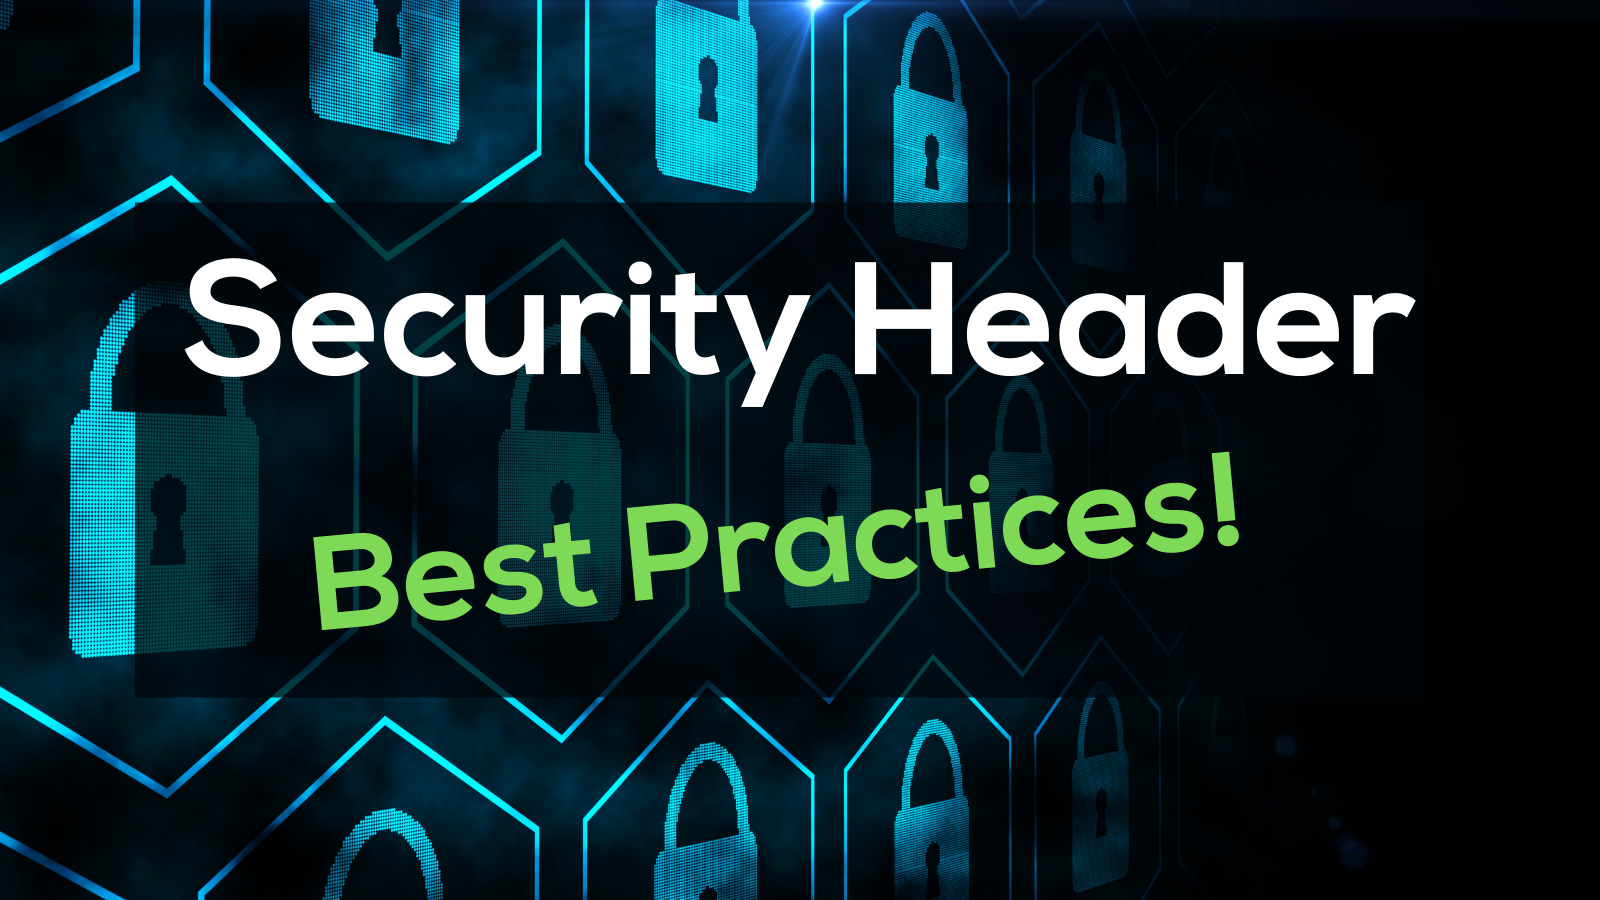 An Overview of Best Practices for Security Headers